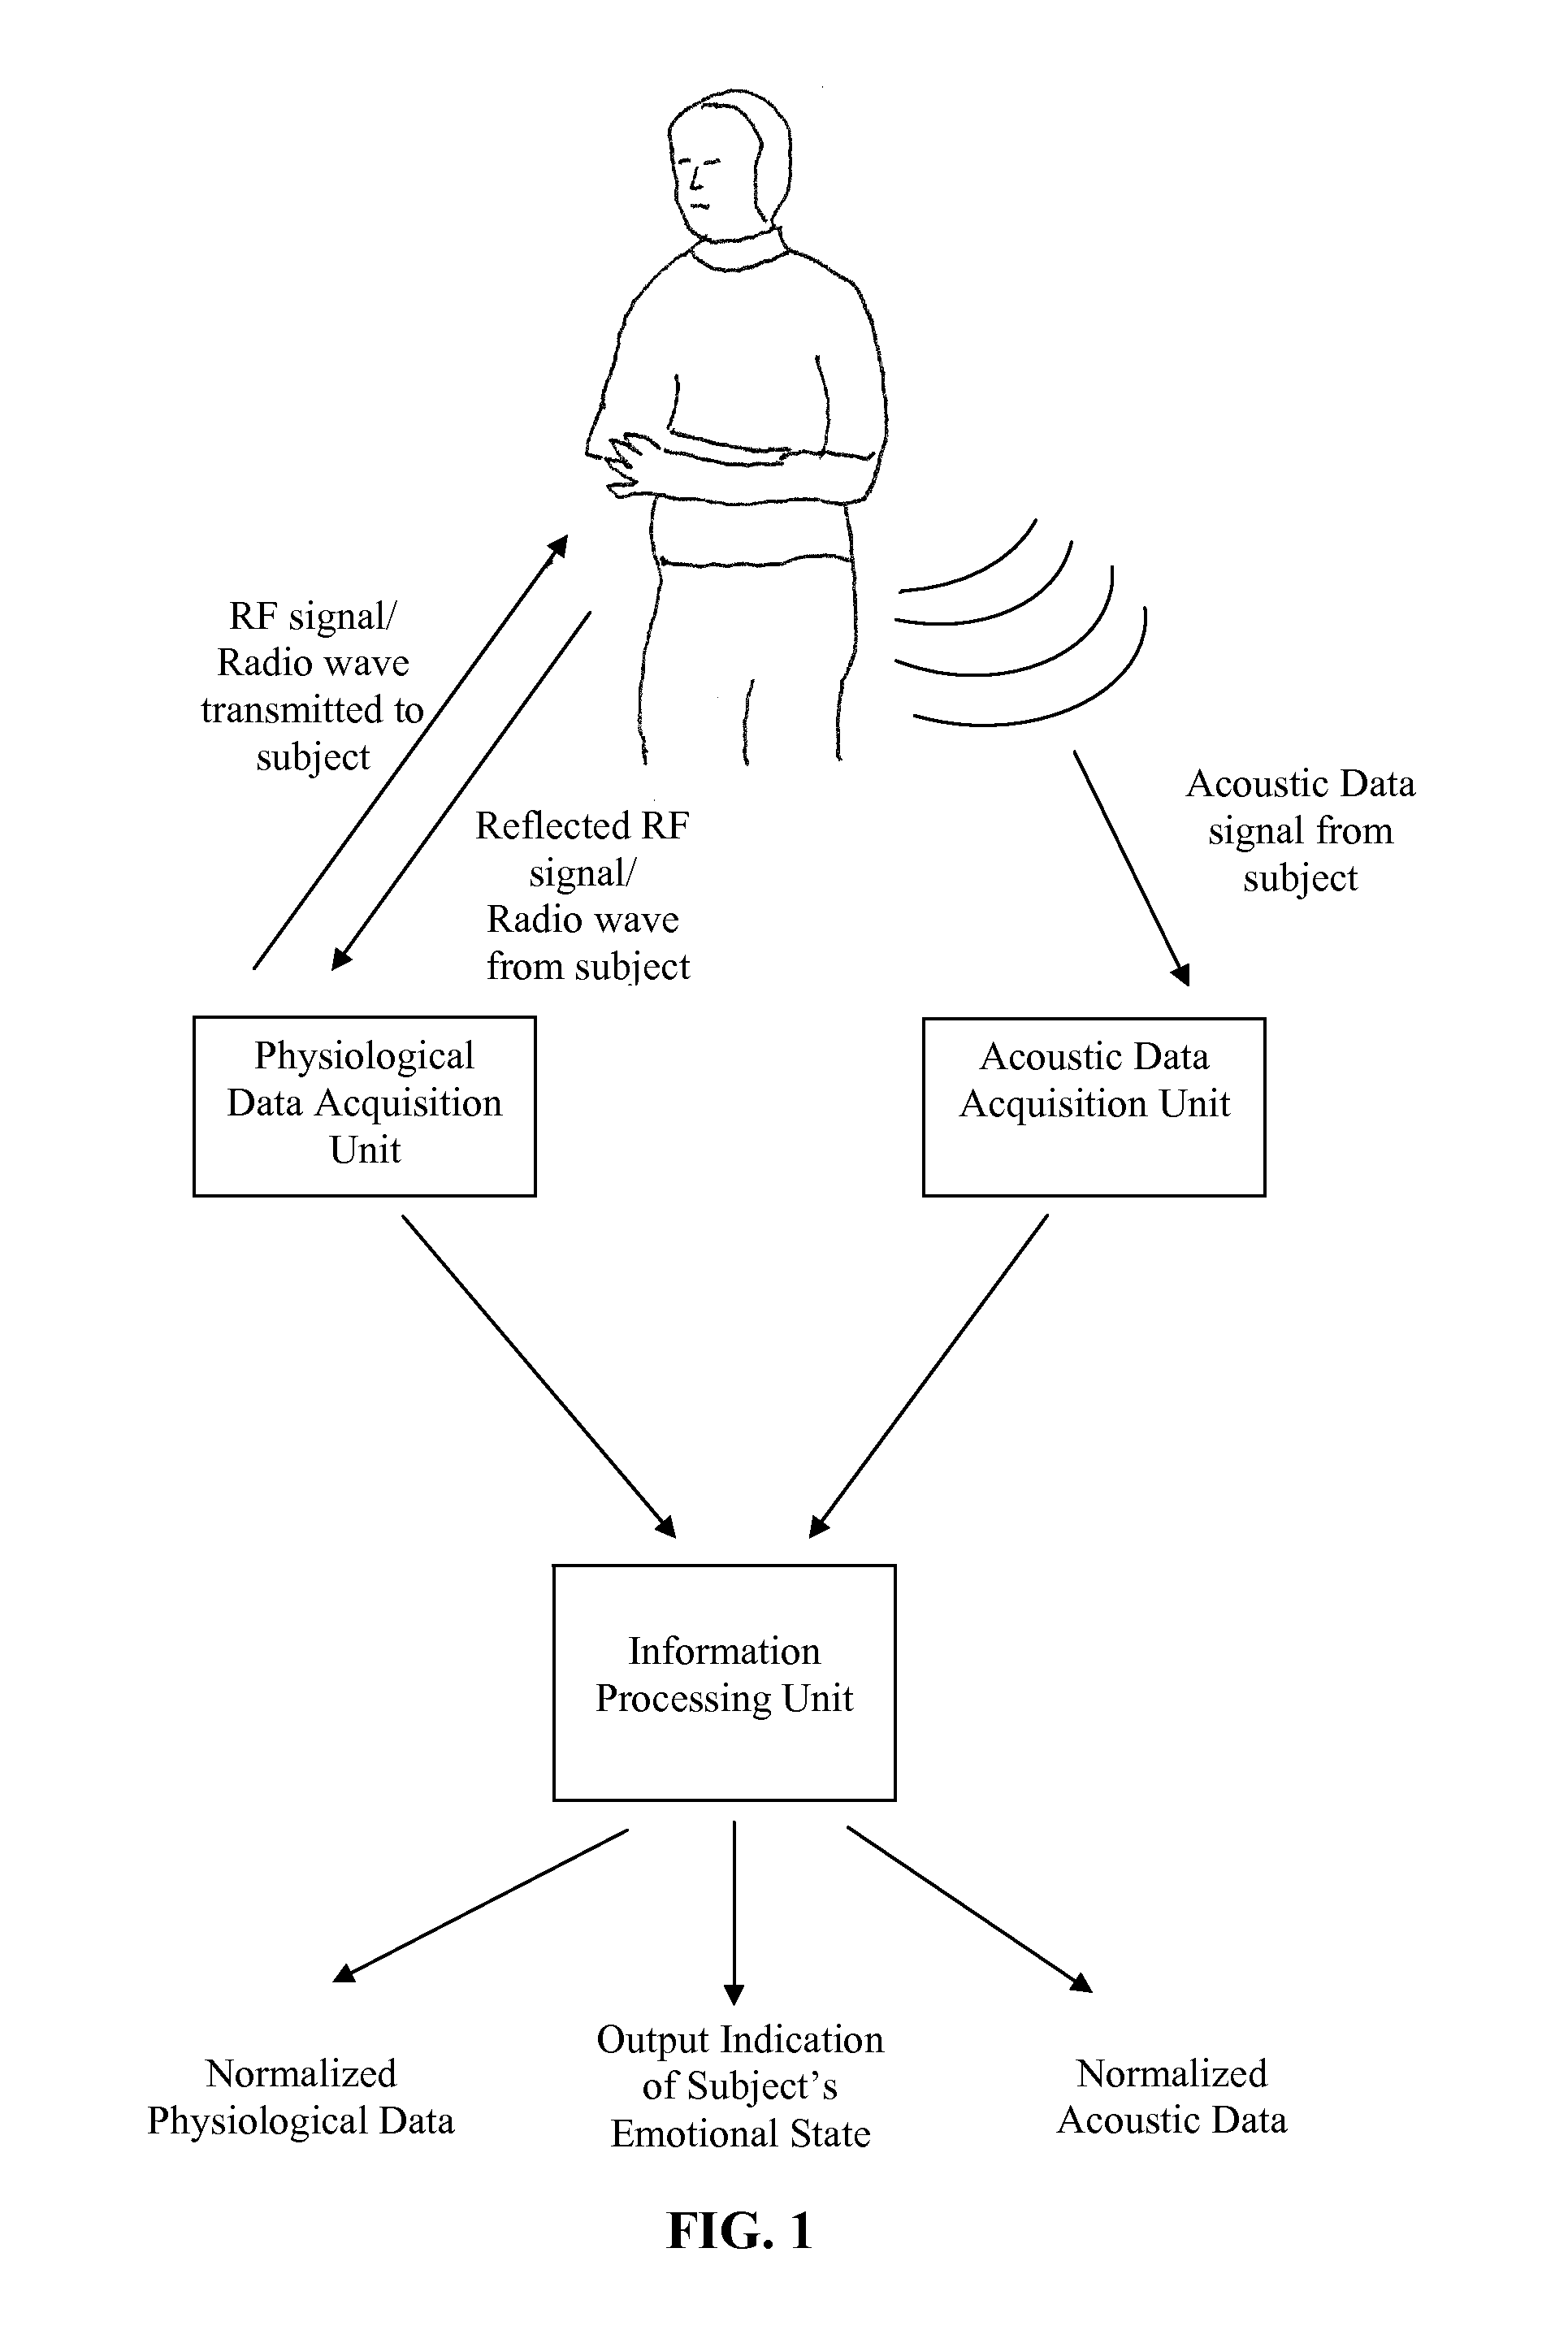 Method and apparatus for evaluation of a subject's emotional, physiological and/or physical state with the subject's physiological and/or acoustic data